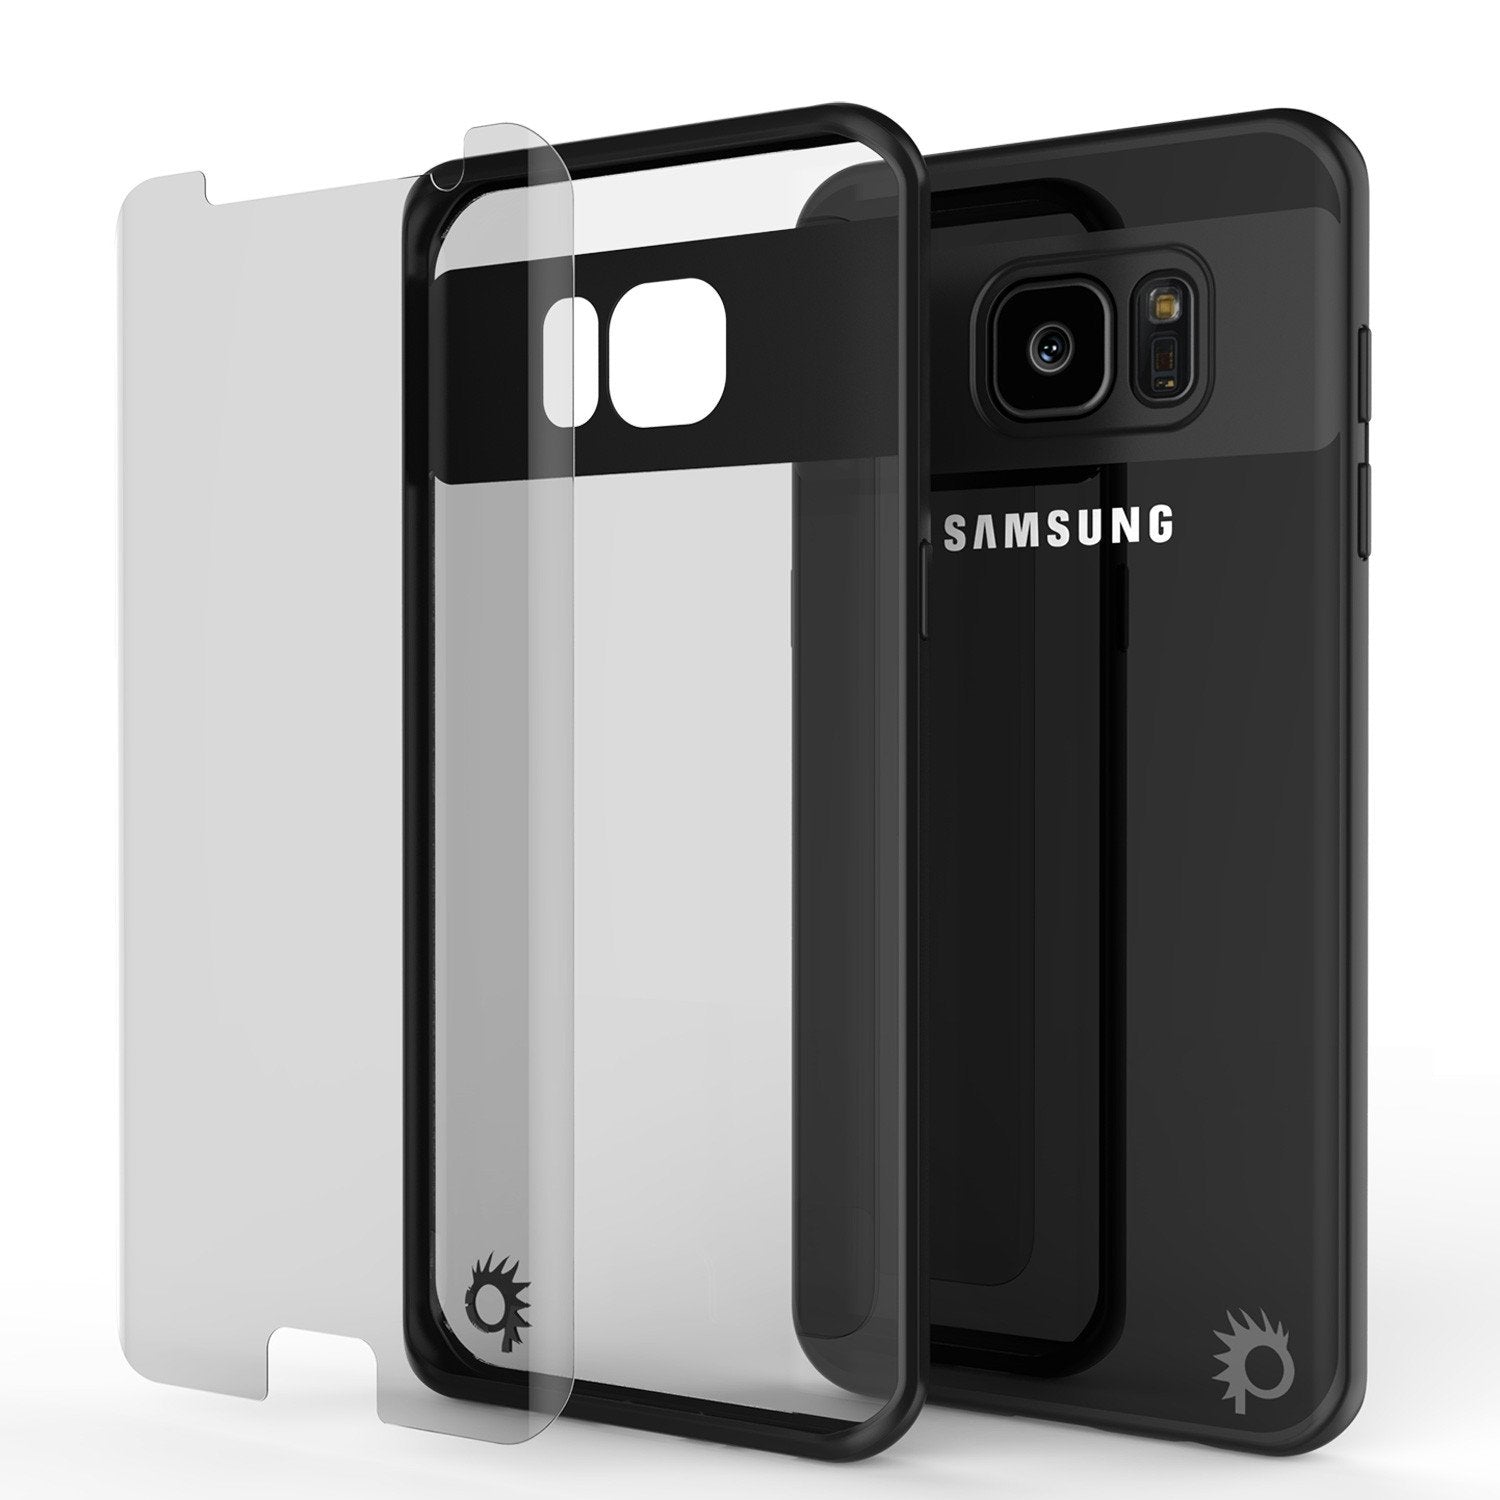 Galaxy S7 Edge Case [MASK Series] [BLACK] Full Body Hybrid Dual Layer TPU Cover W/ Protective PUNKSHIELD Screen Protector